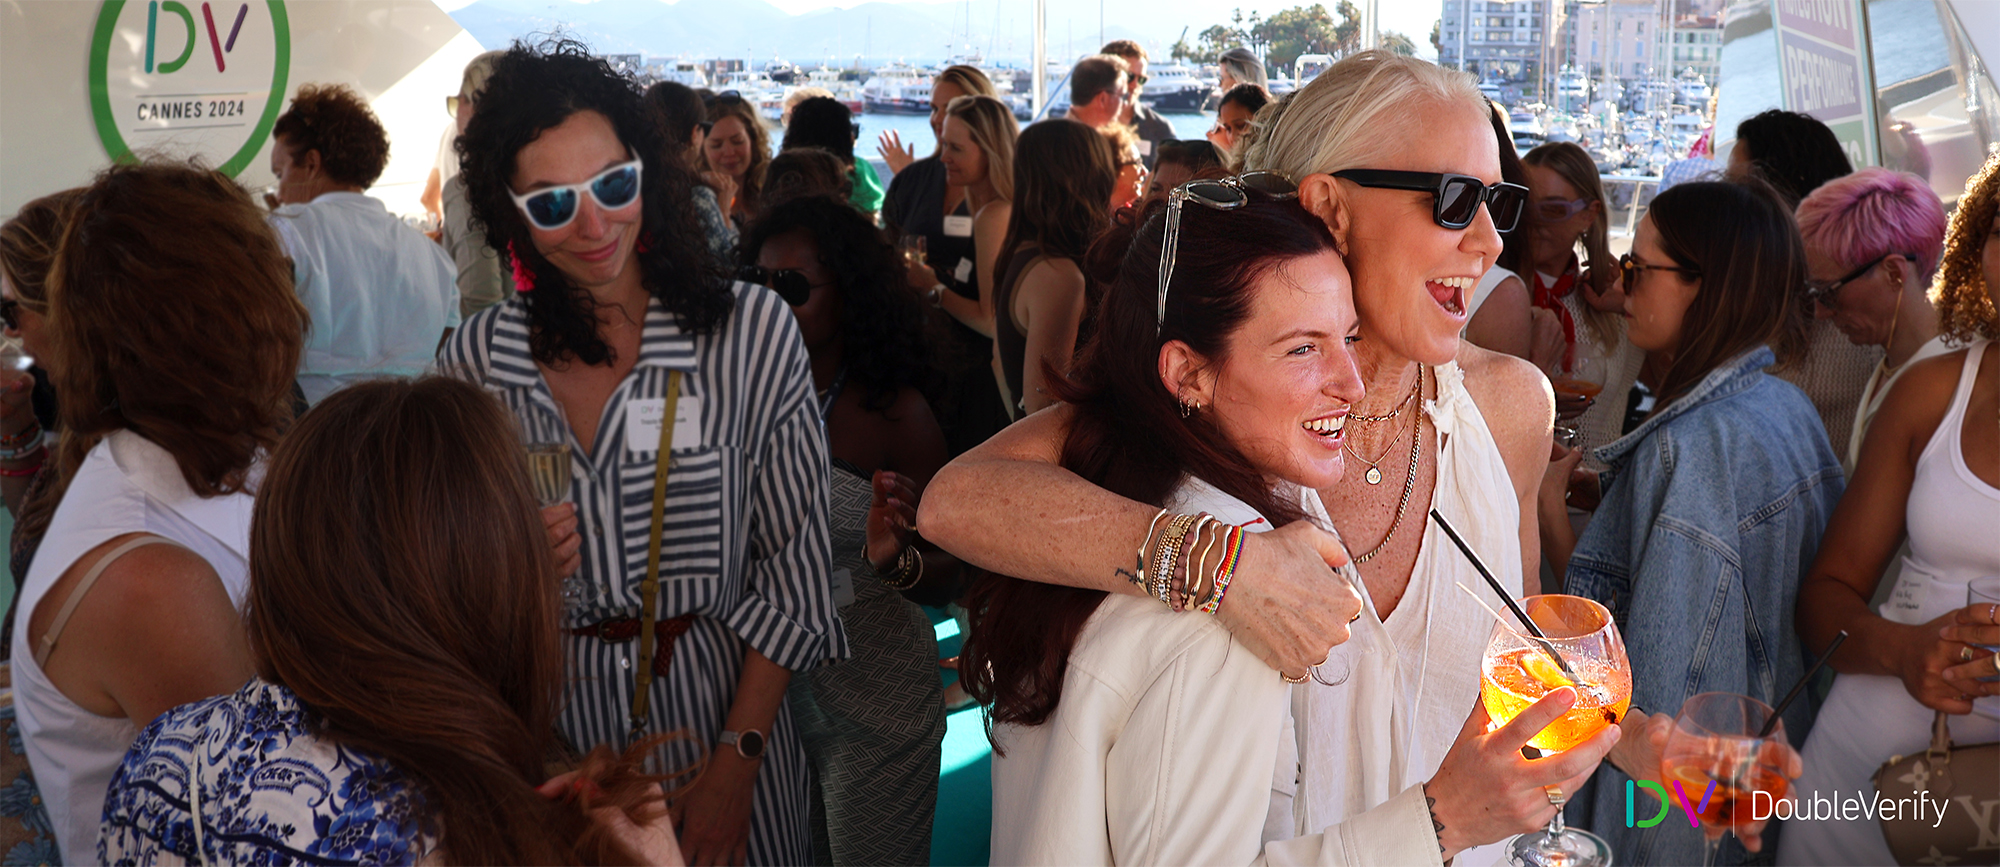 Photo taken on DV's yacht at the 2024 Cannes Lions International Festival of Creativity showing women socializing with a focus on two women laughing and embracing.